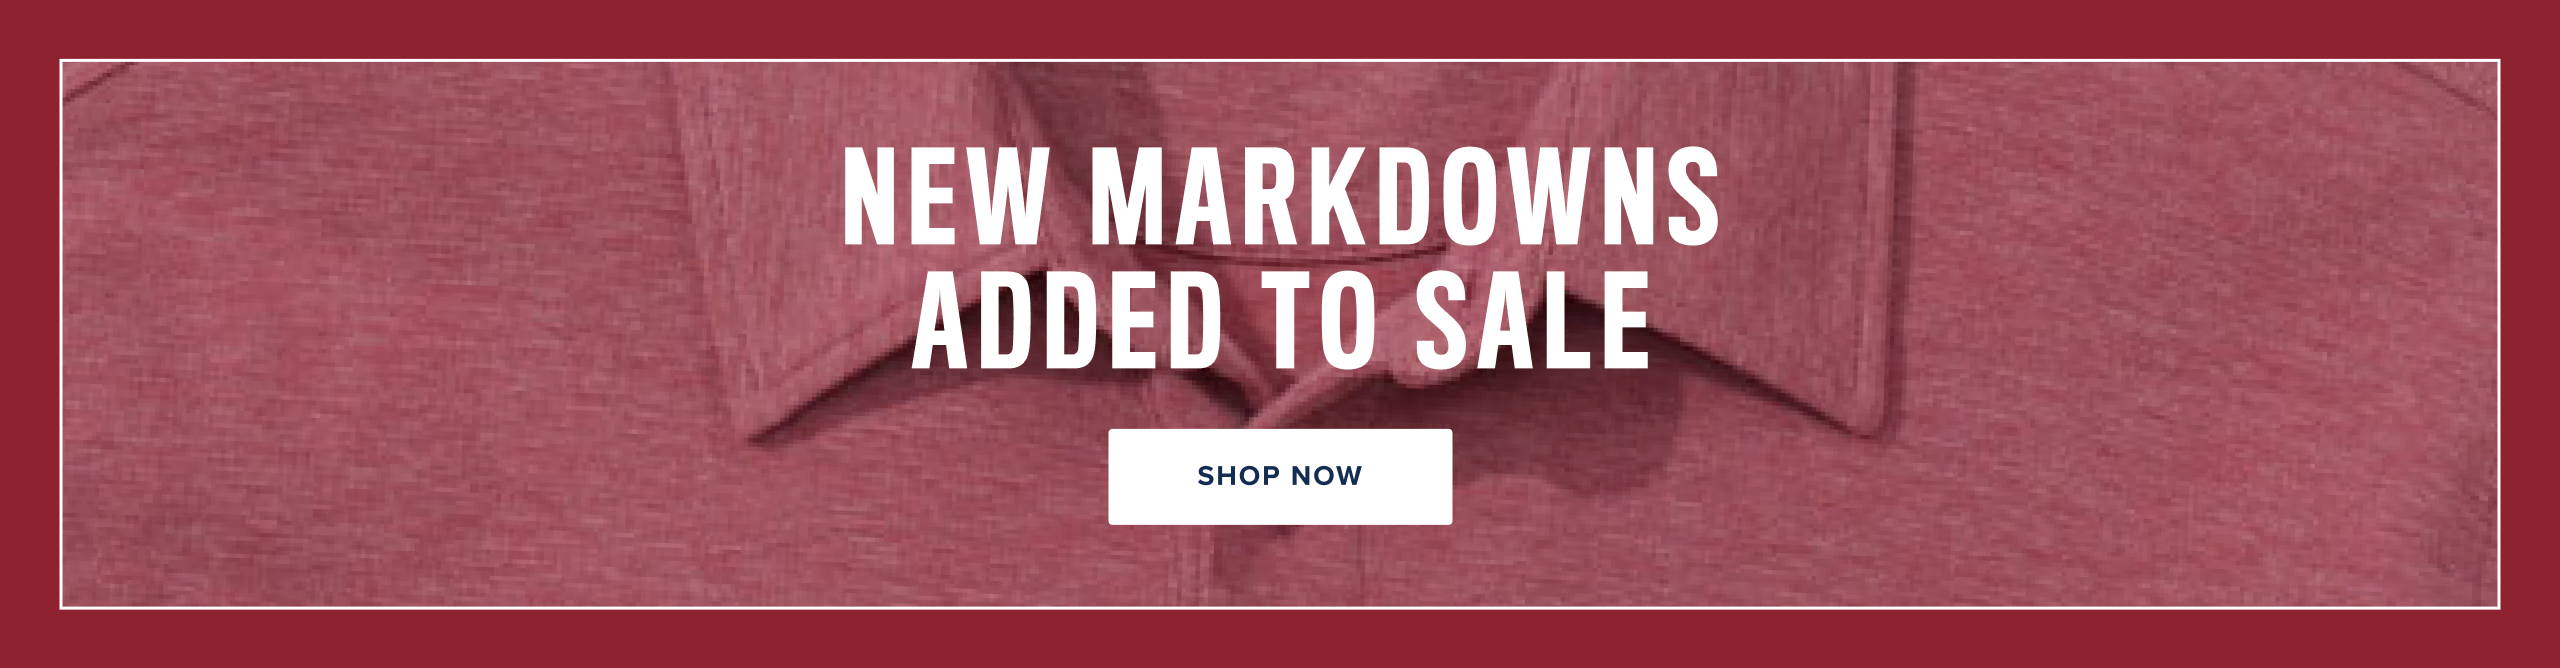 New Markdowns added to sale. 